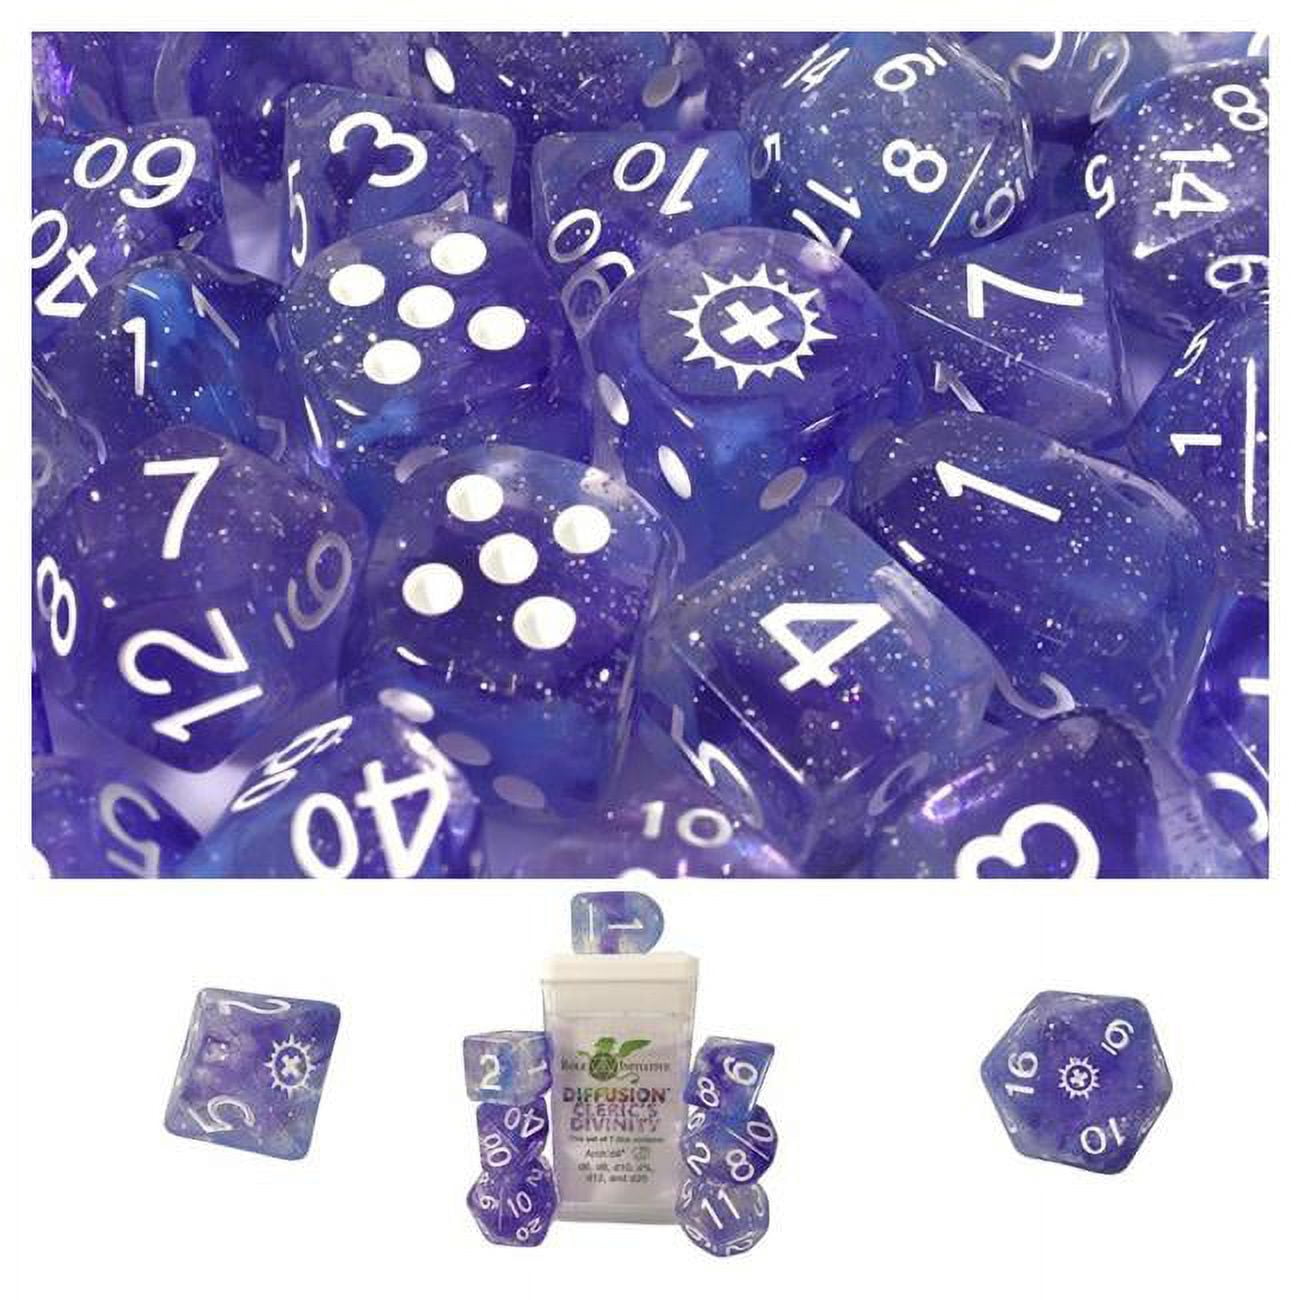 Picture of Role 4 Initiative R4I50523-7C-S Diffusion Clerics Divinity Dice - Set of 7